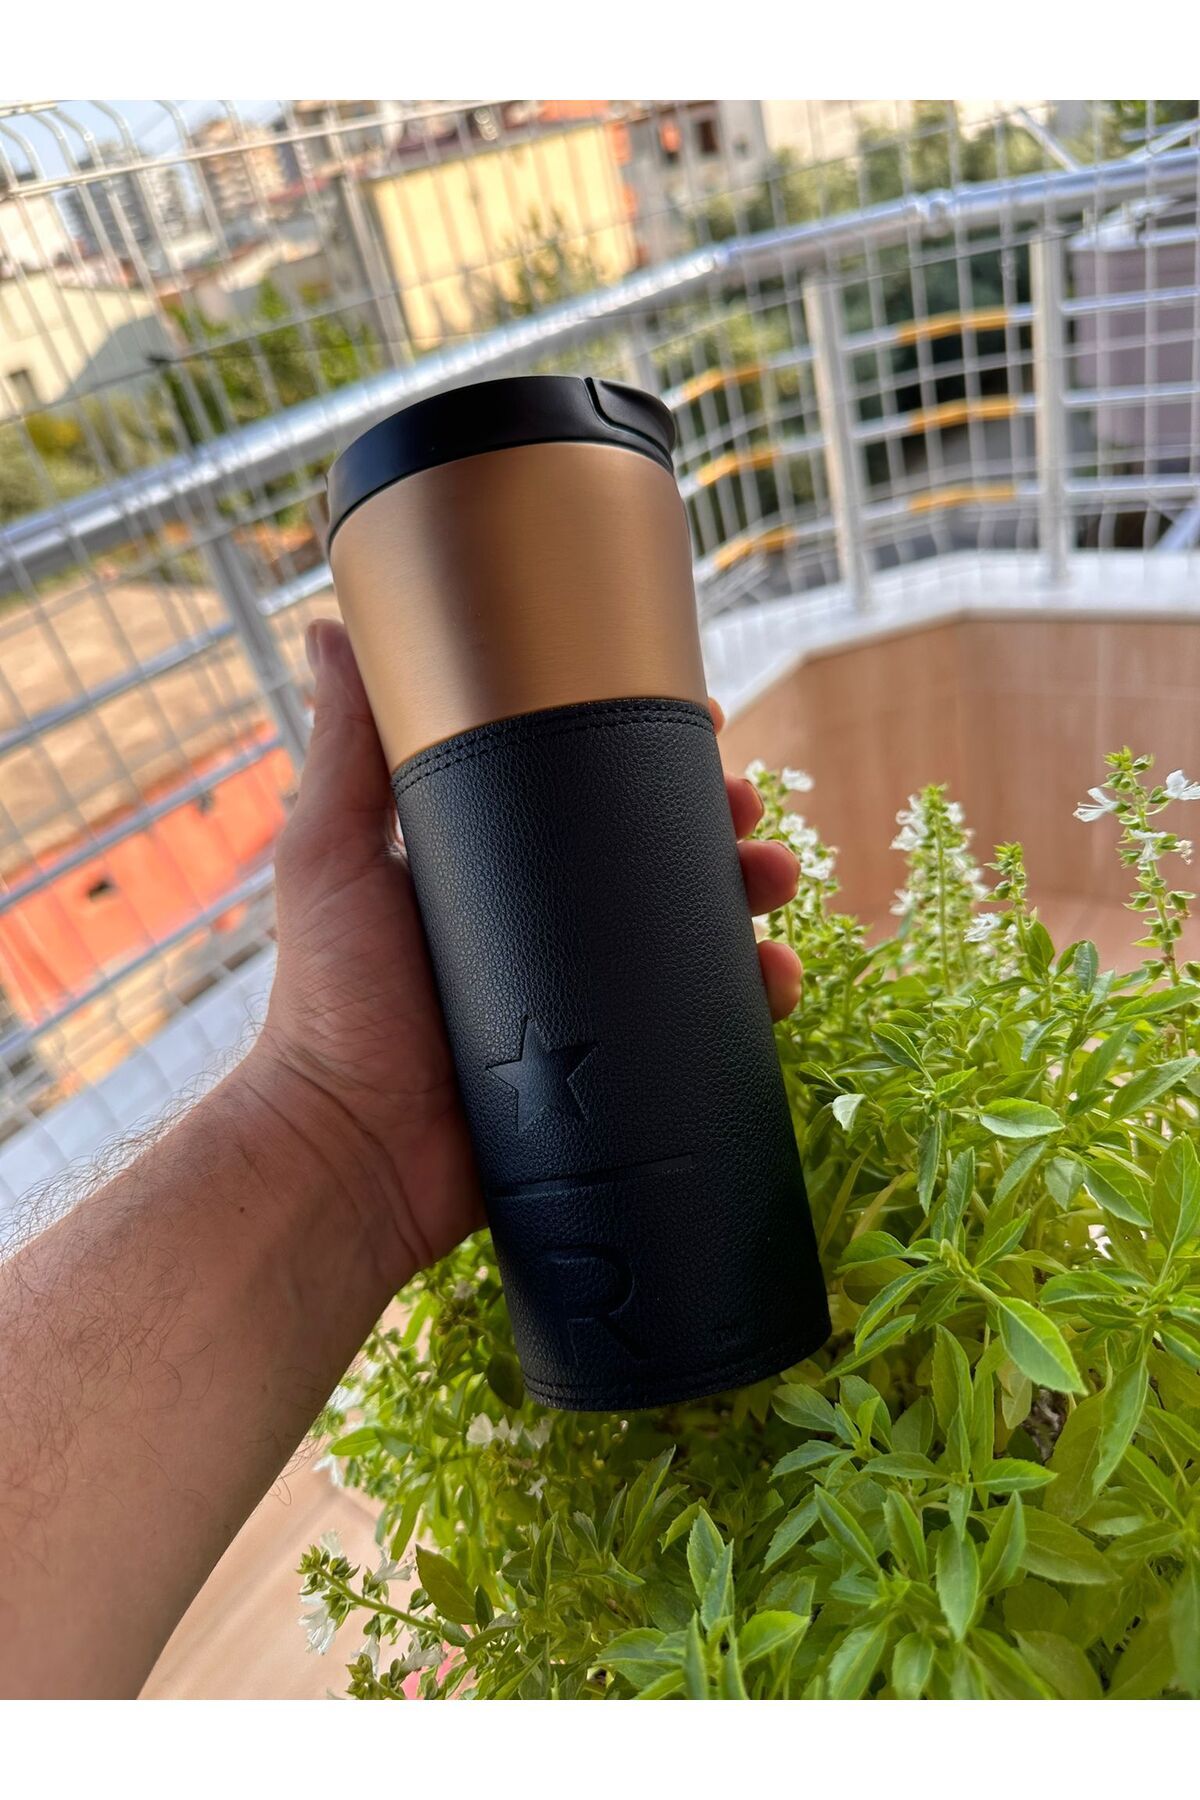 Thermos Starbucks®With wave pattern stainless steel 355 ml-11139776 -  AliExpress